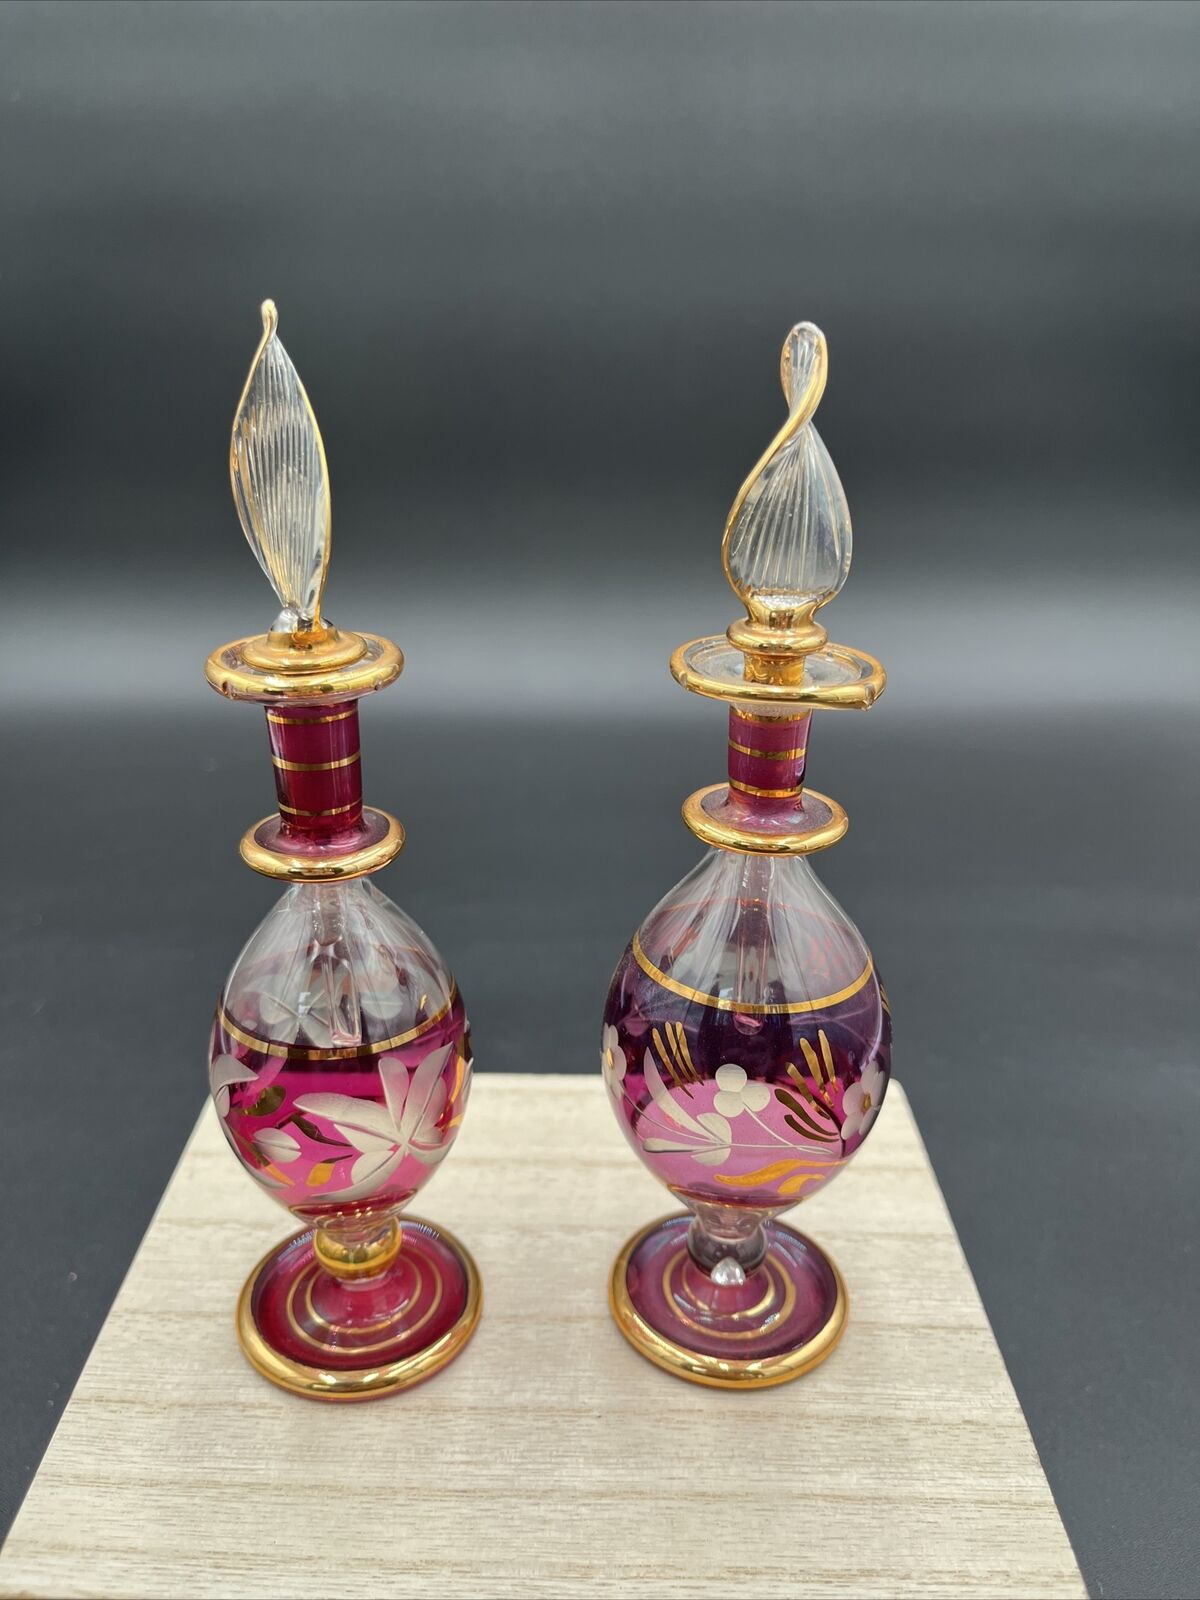 Vintage Egyptian Blown Glass Perfume Bottles Gold Etched Set of 2 Purple 6.5”